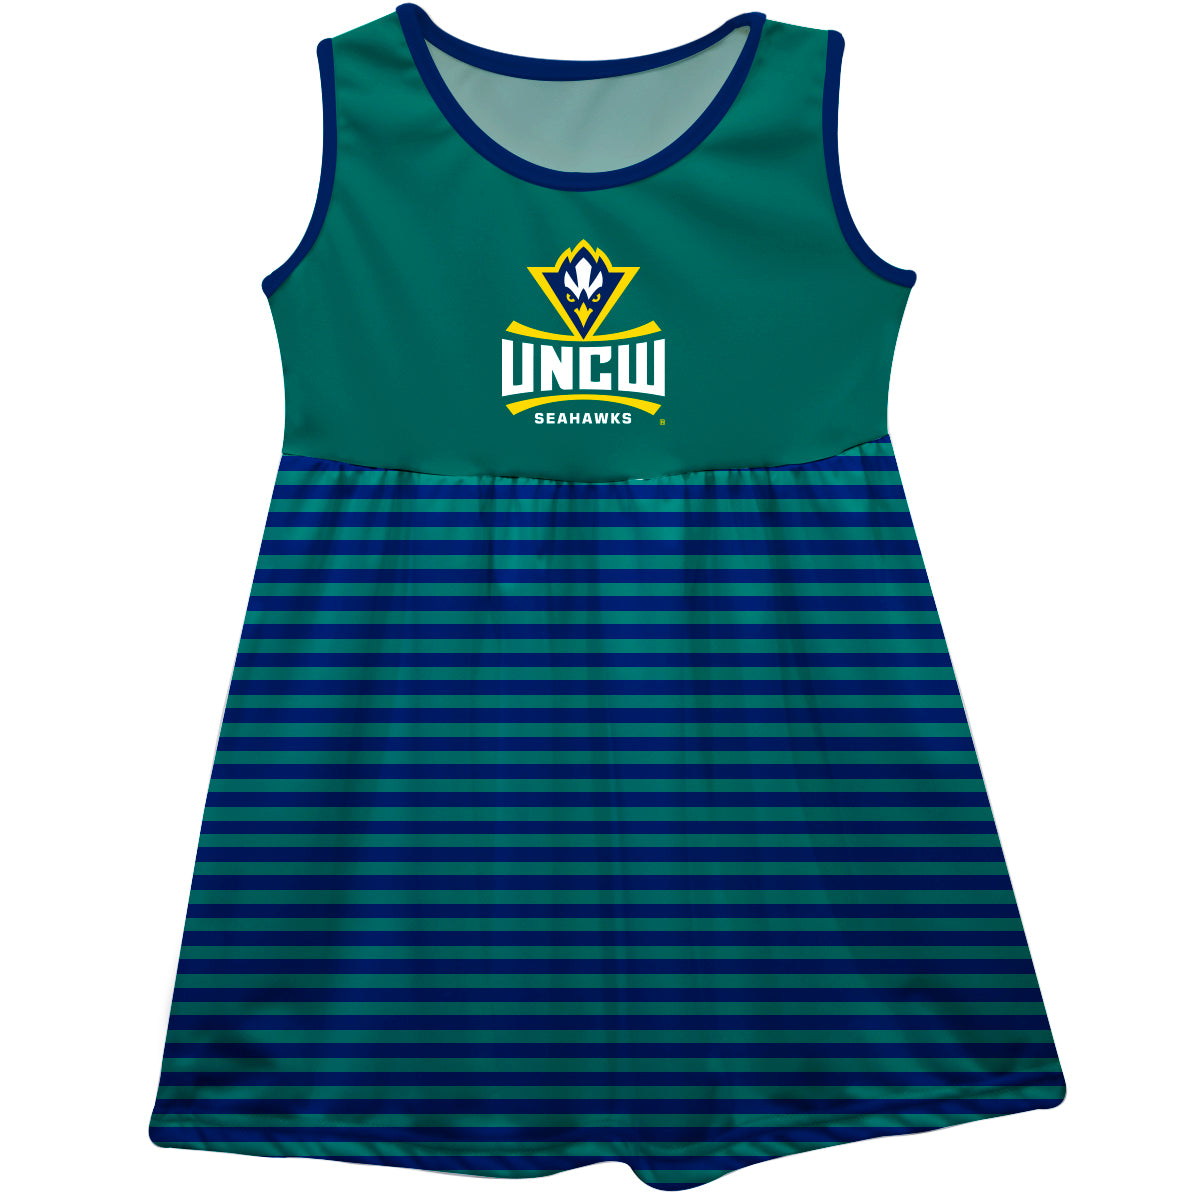 UNC Wilmington Seahawks UNCW Girls Game Day Sleeveless Tank Dress Solid Teal Logo Stripes on Skirt by Vive La Fete-Campus-Wardrobe